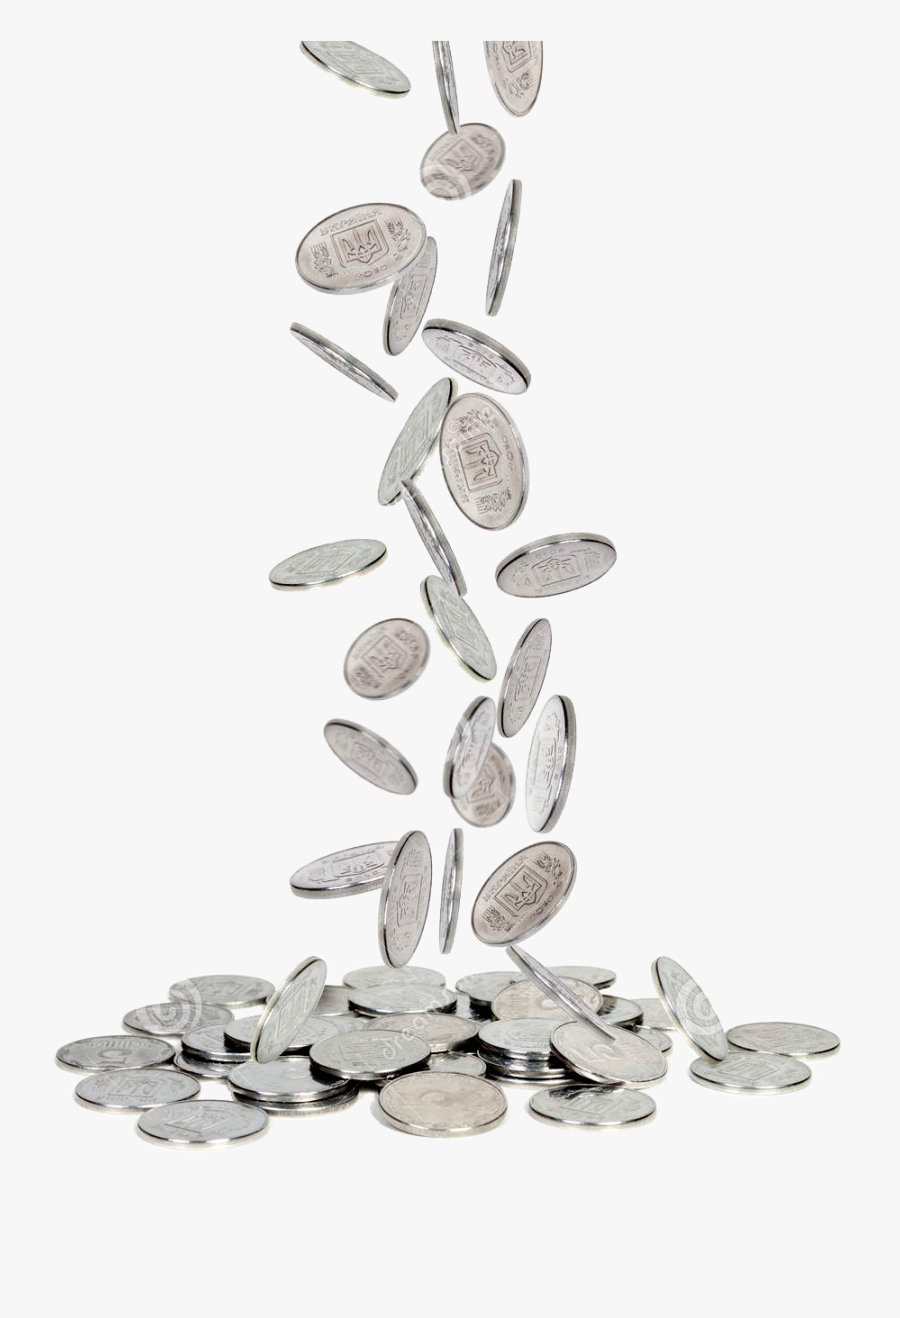 Silver Coins Png Falling Images Free - Transparent Silver Coins Png, Transparent Clipart